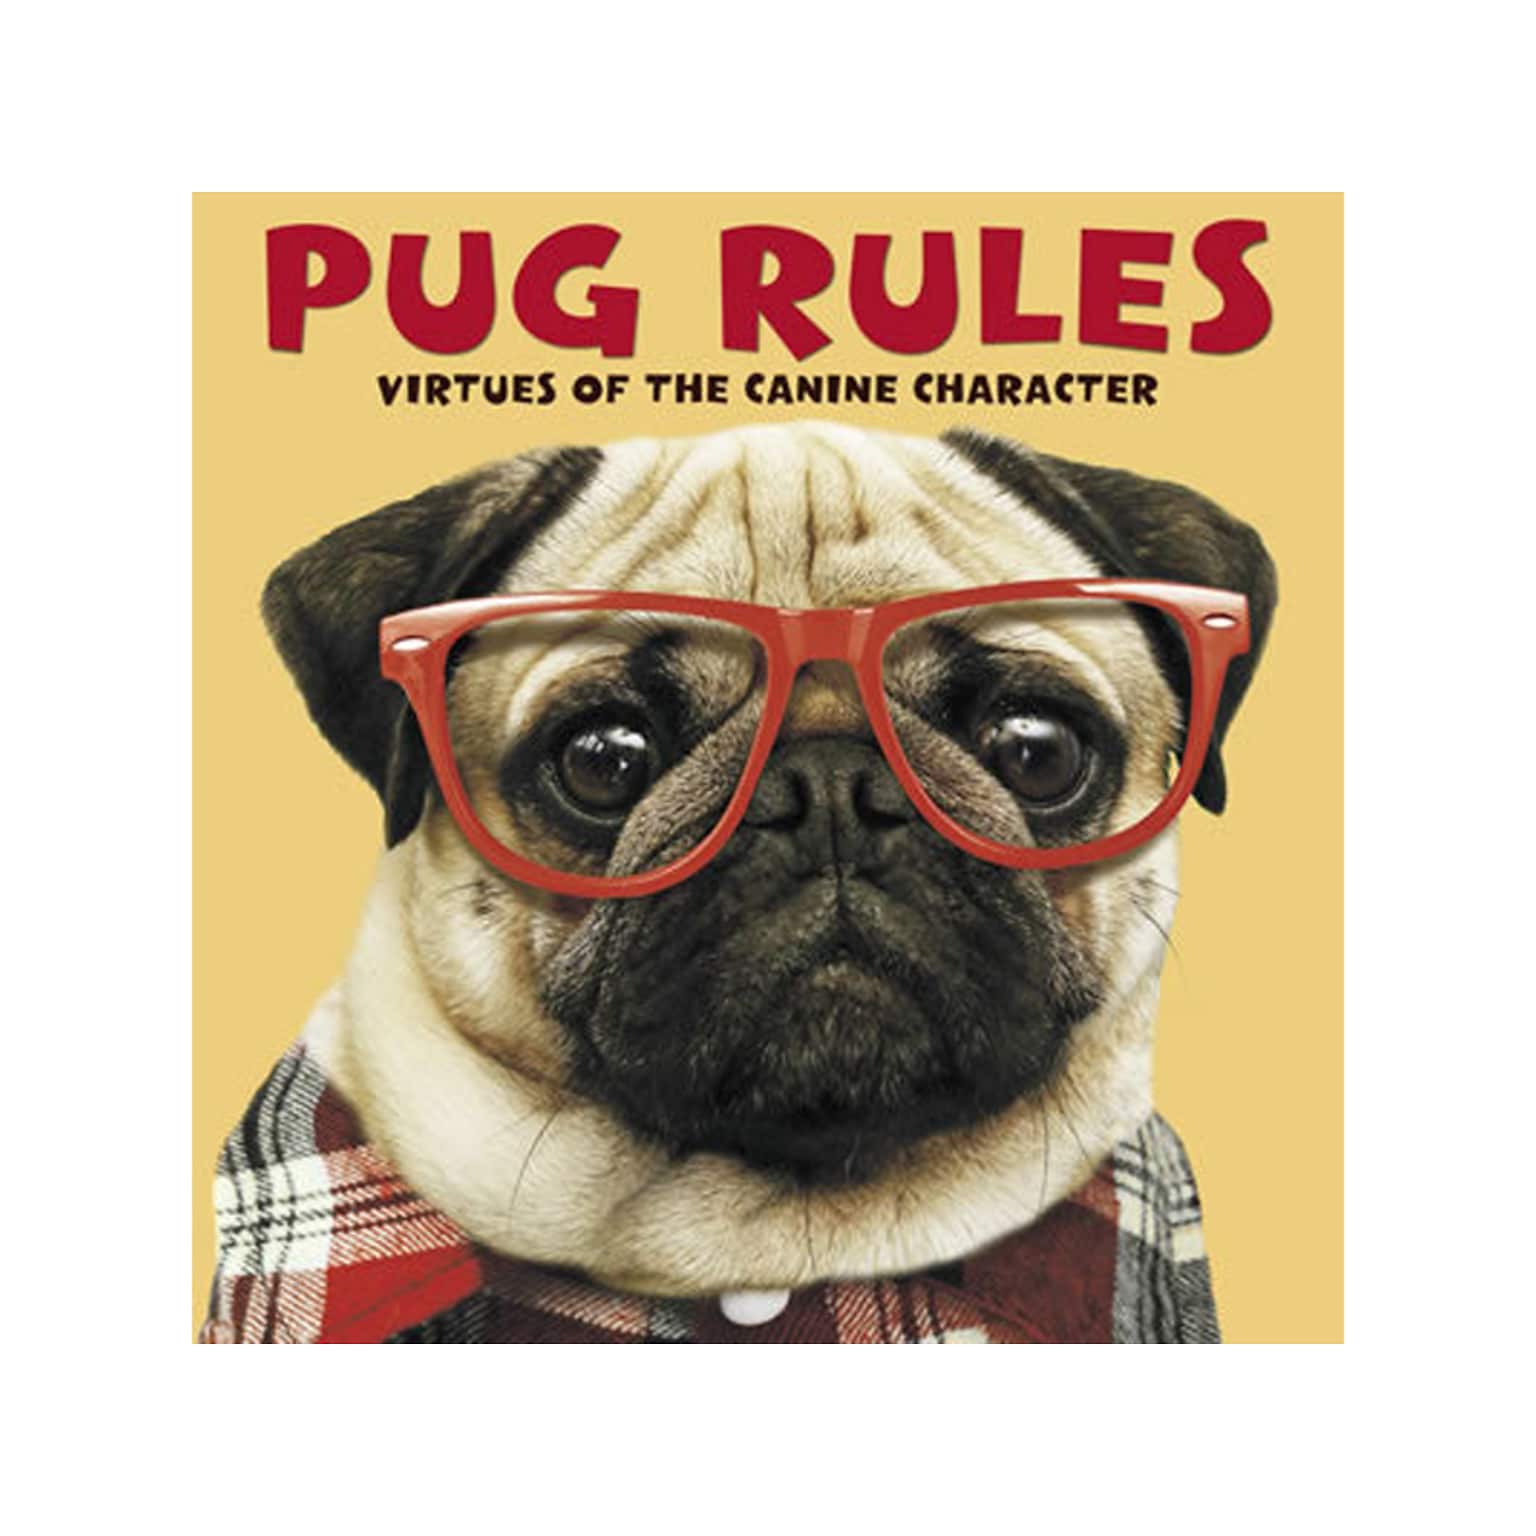 Pug Rules, Chapter Book, Hardcover (48130)